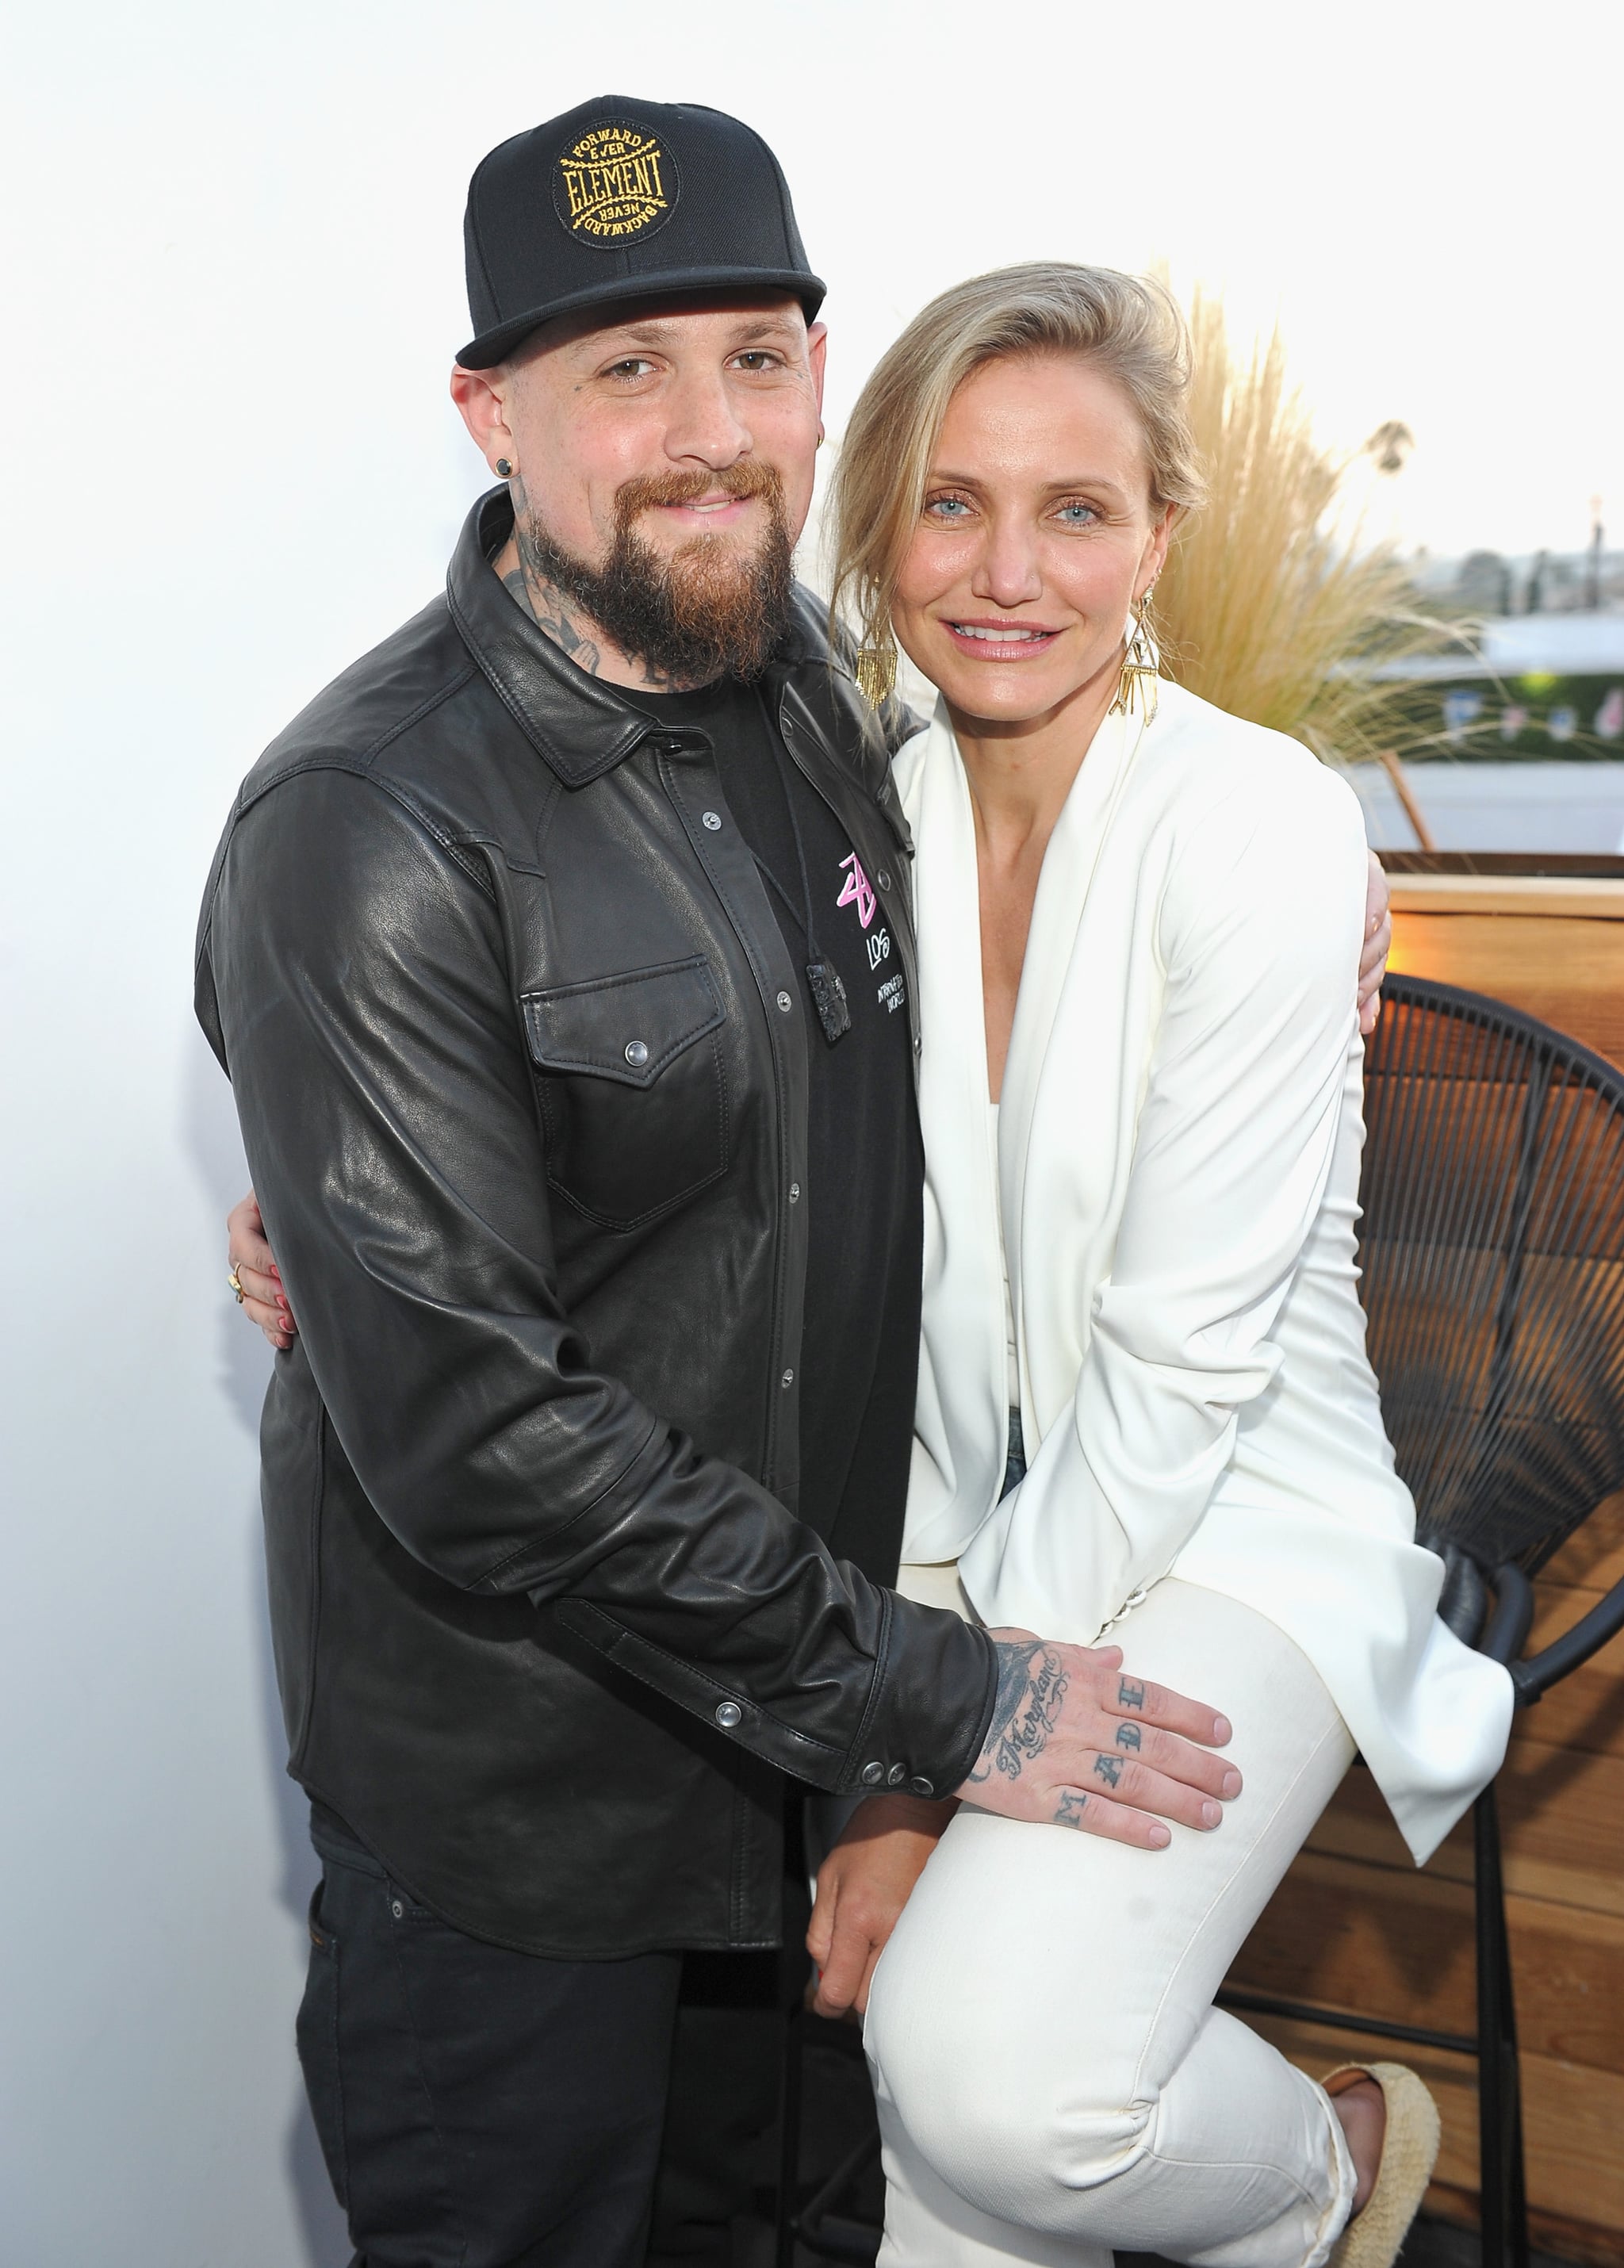 LOS ANGELES, CA - JUNE 02:  Guitarist Benji Madden and actress Cameron Diaz attend House of Harlow 1960 x REVOLVE on June 2, 2016 in Los Angeles, California.  (Photo by Donato Sardella/Getty Images for REVOLVE)